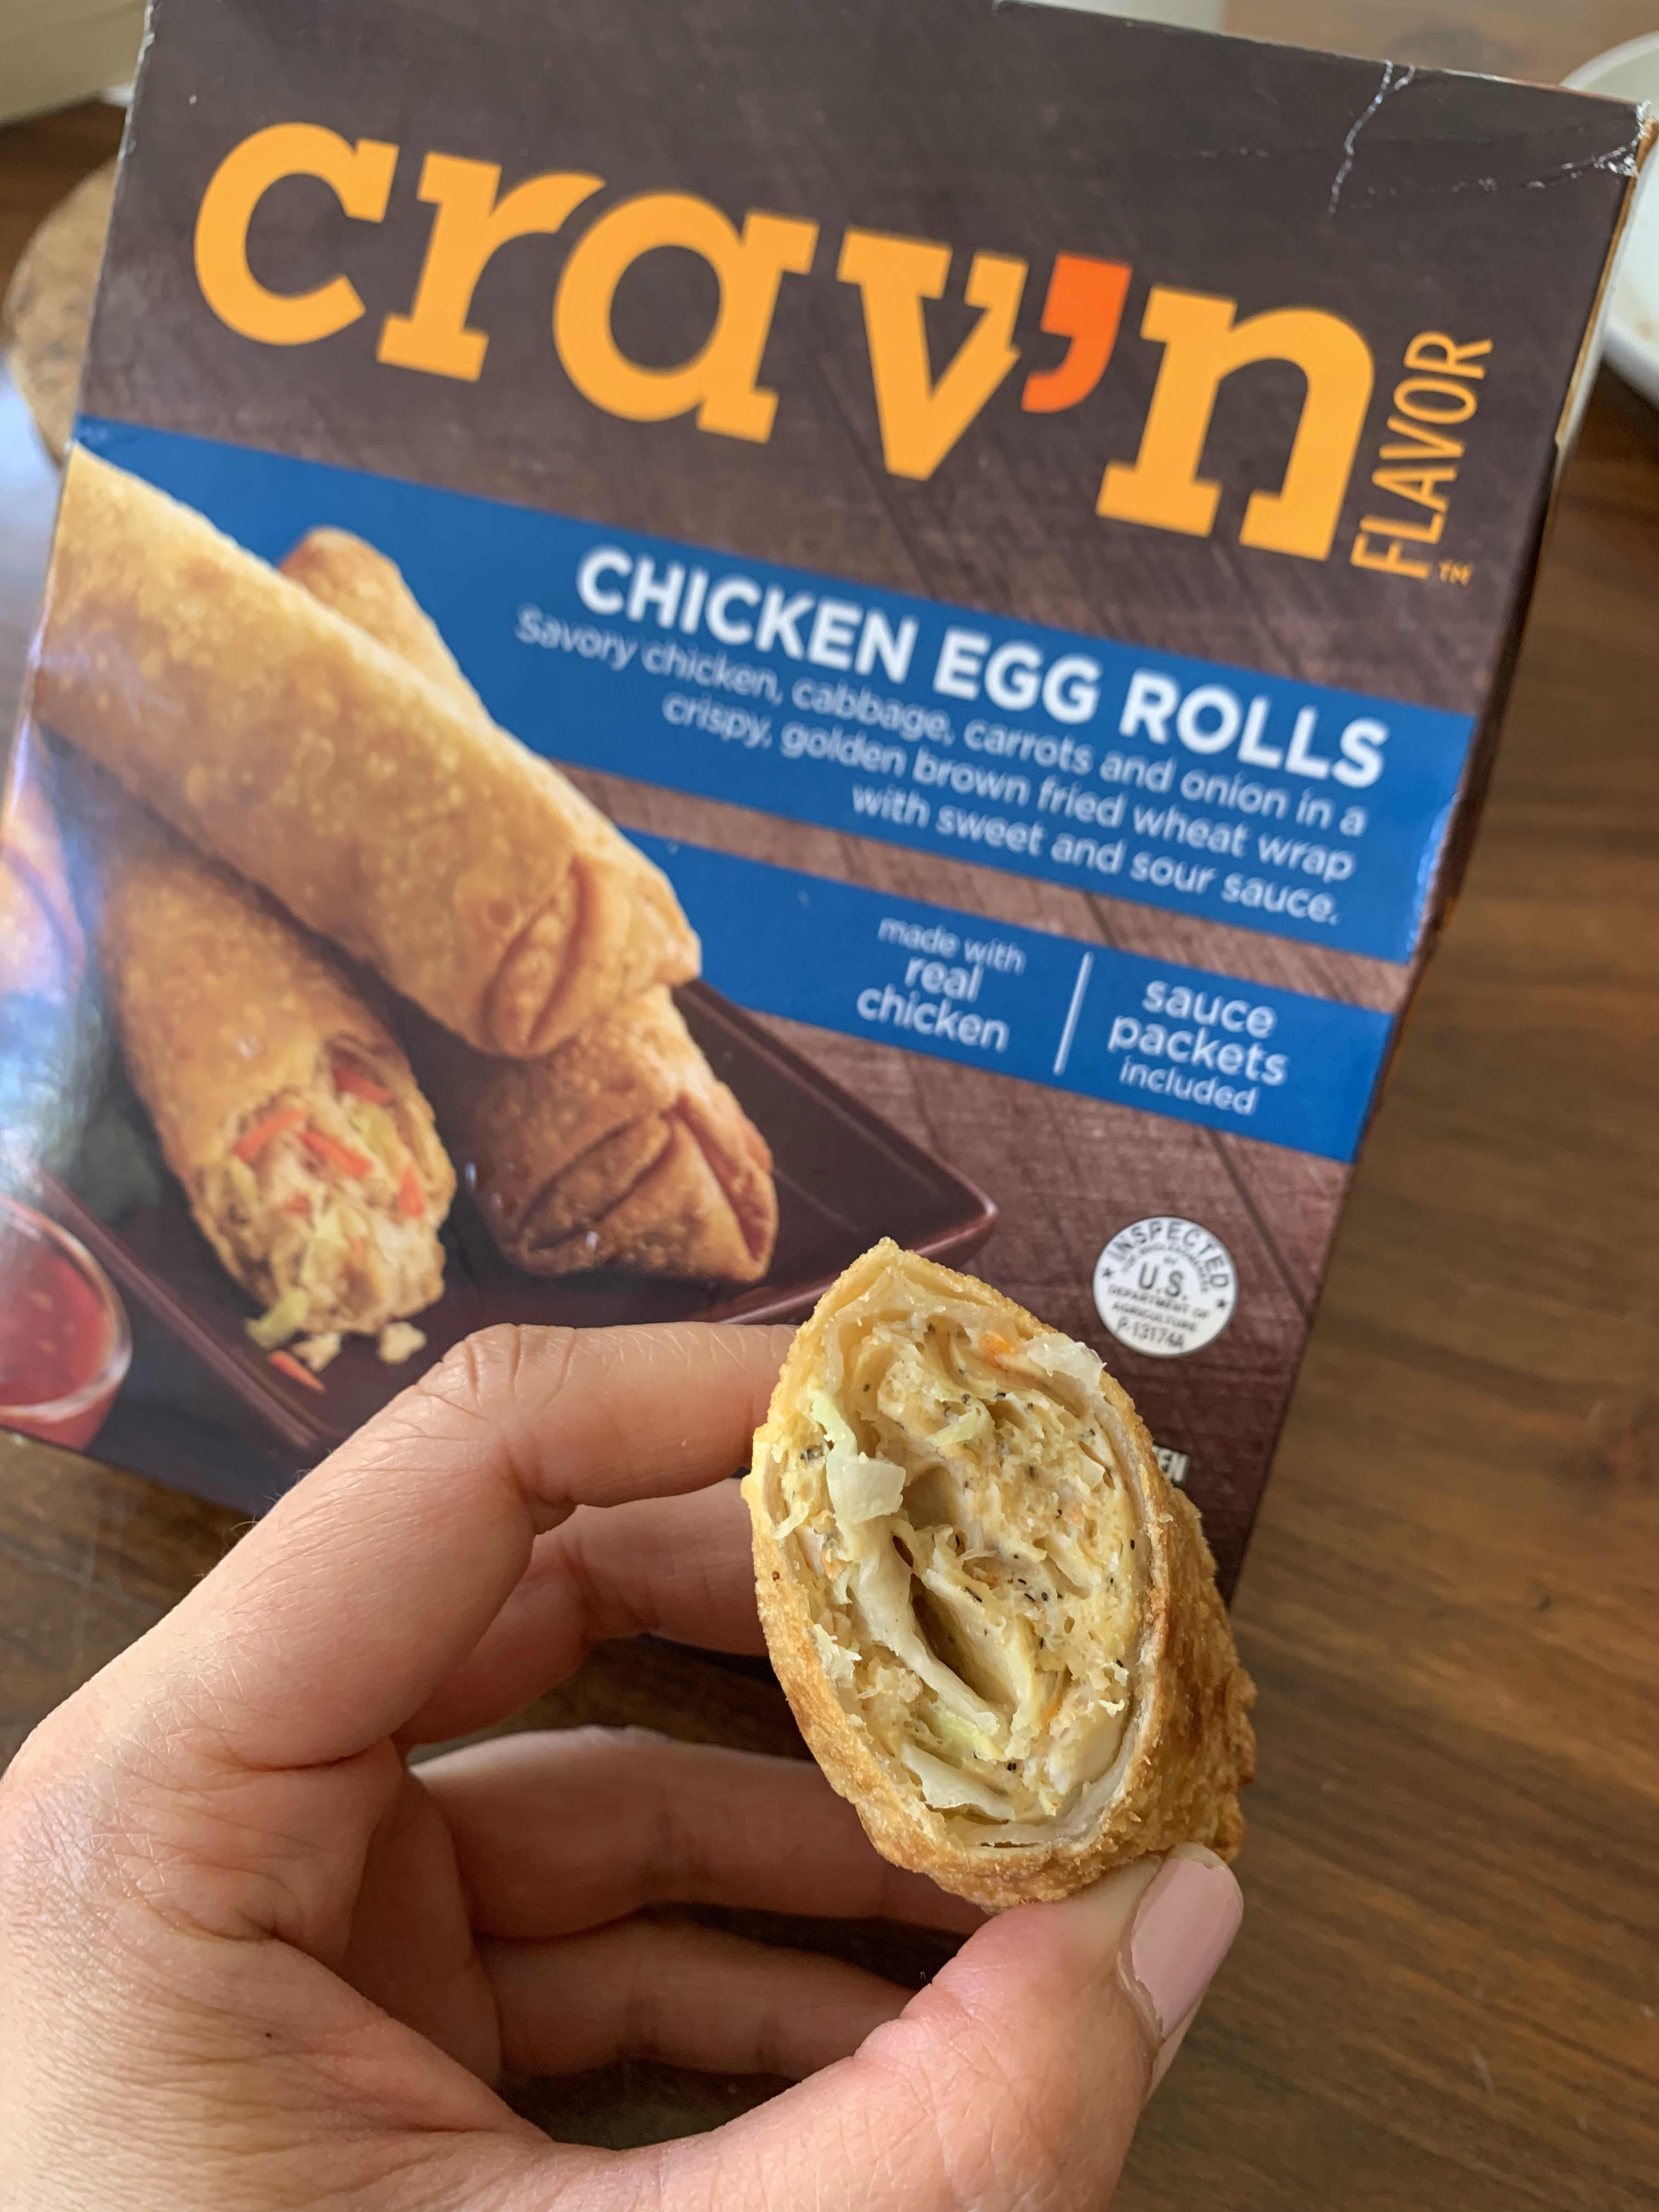 Food Review: Dynasty Egg Roll Wrappers - Bachelor on the Cheap